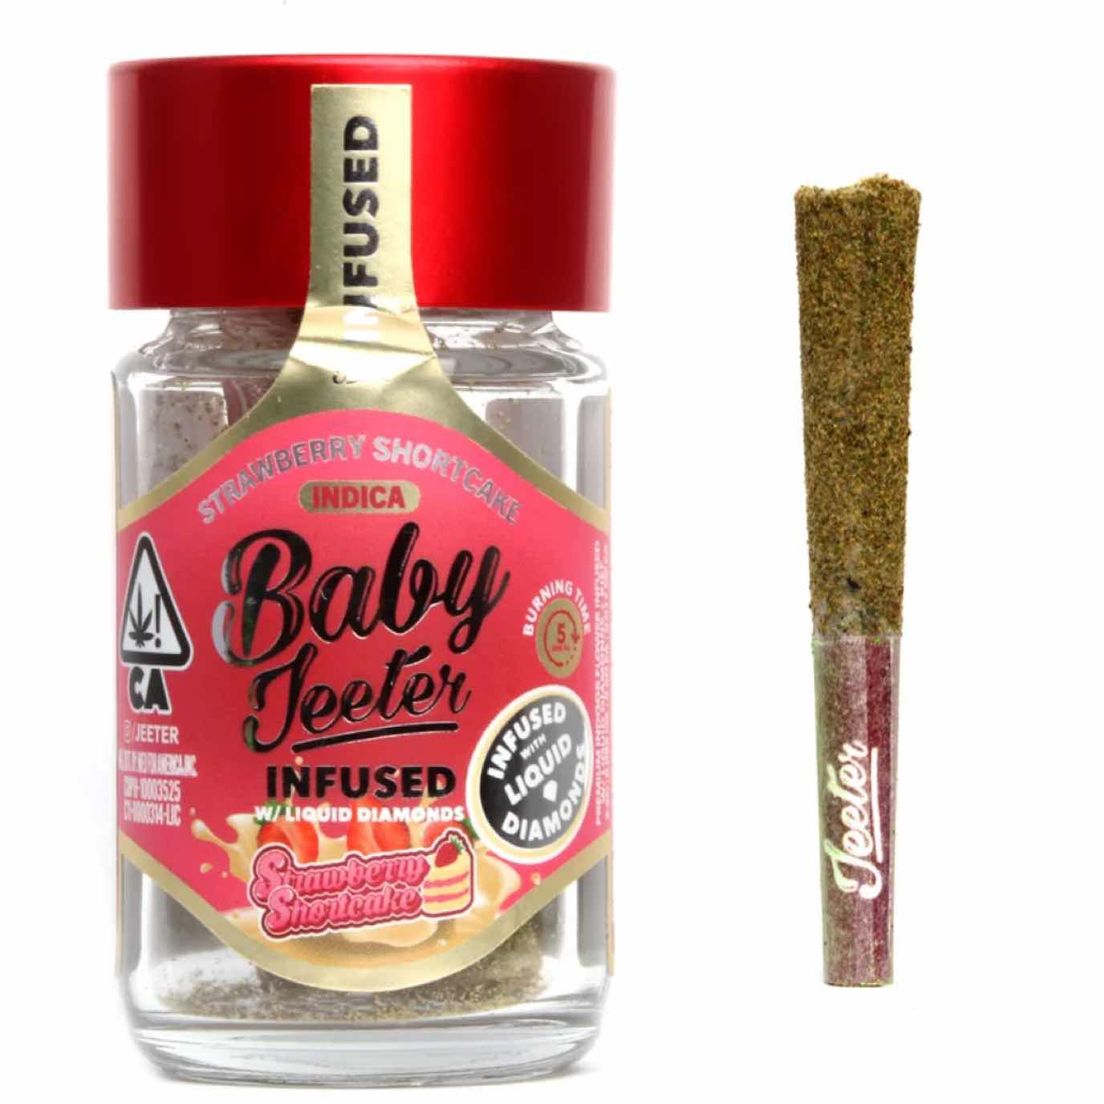 Baby Jeeter Infused - Strawberry Shortcake (5 pack ) THC: 45.12%